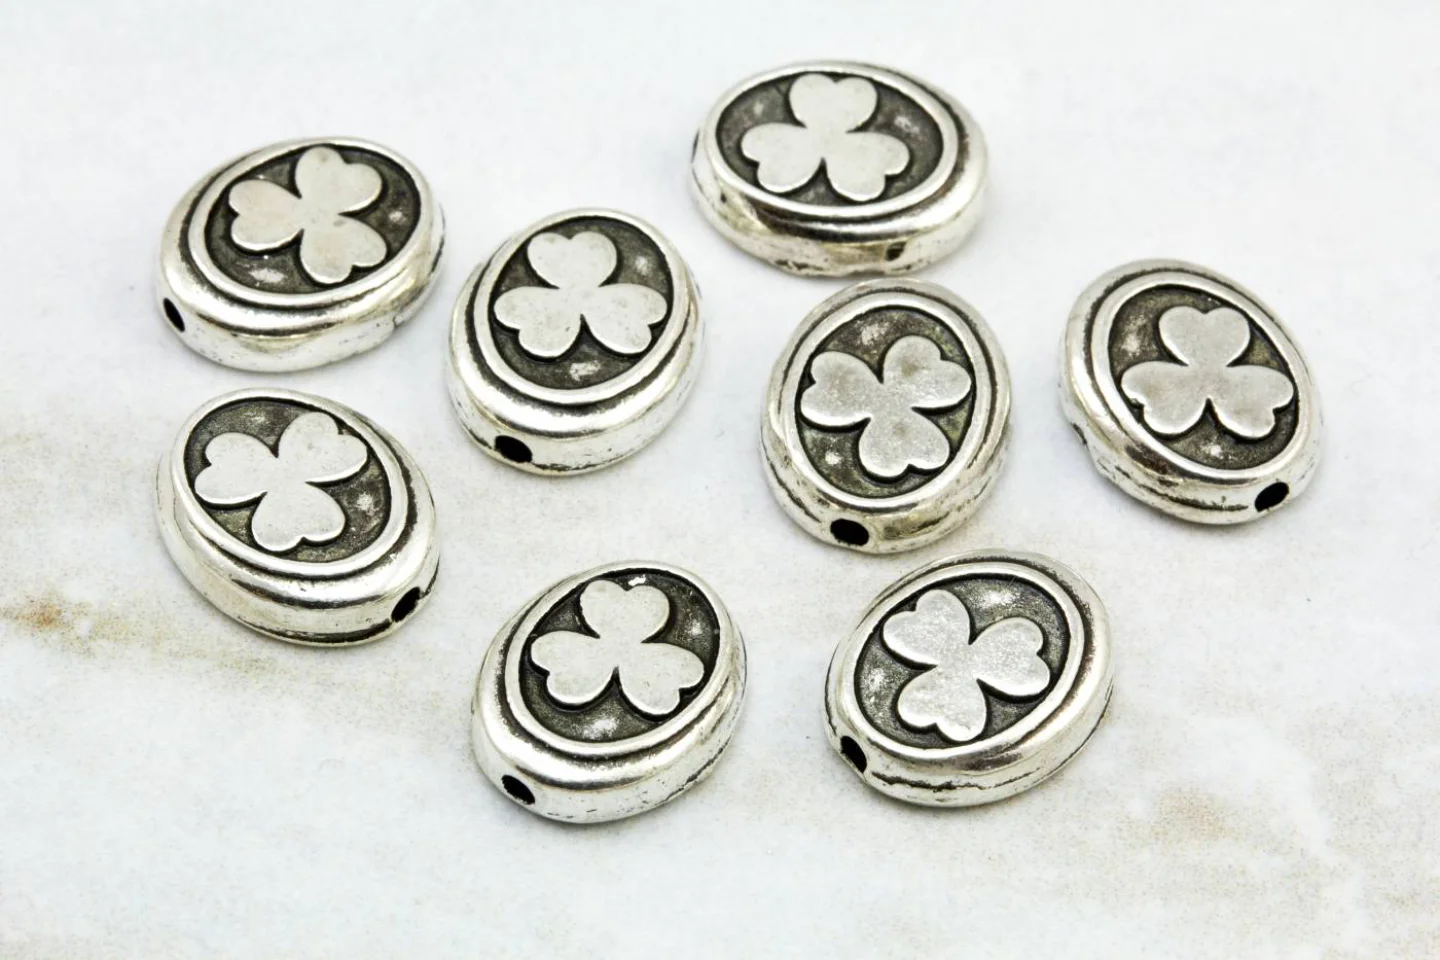 clover-pattern-metal-oval-charm-findings.